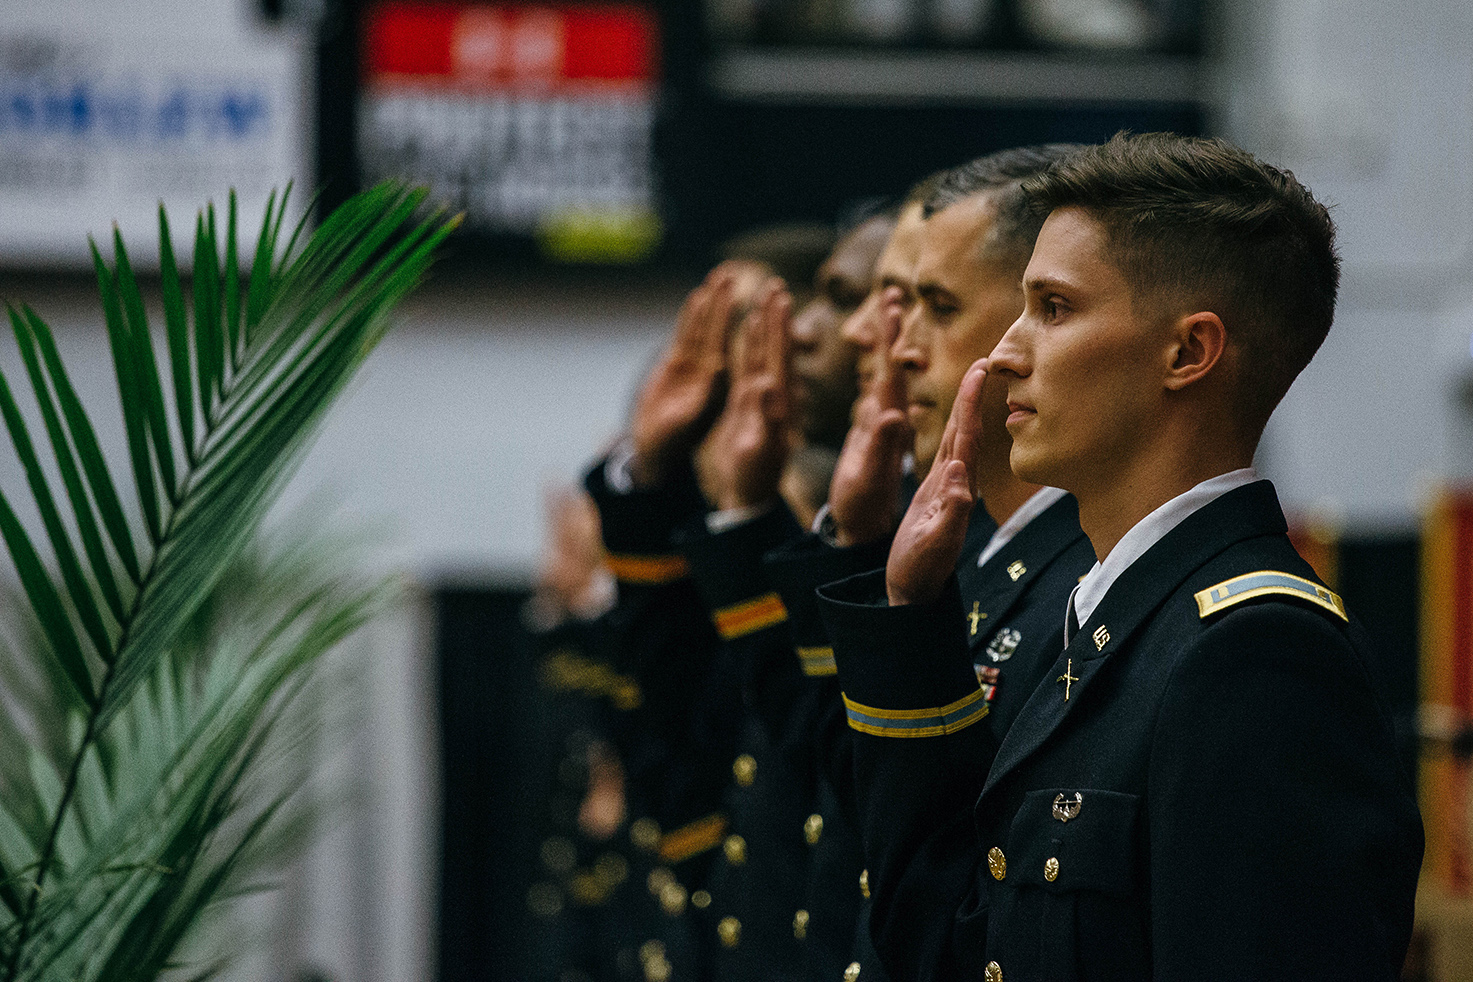 ROTC students being comissioned into the U.S. Army.